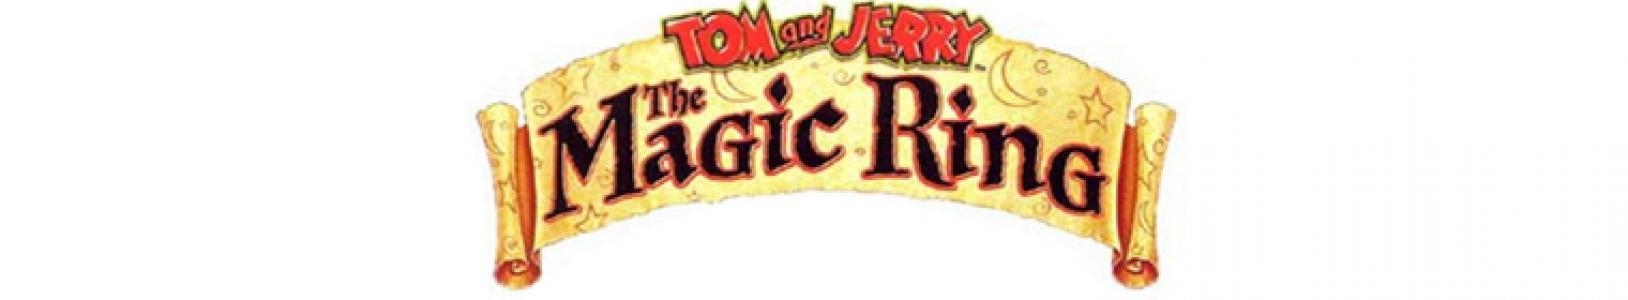 Tom and Jerry: The Magic Ring banner